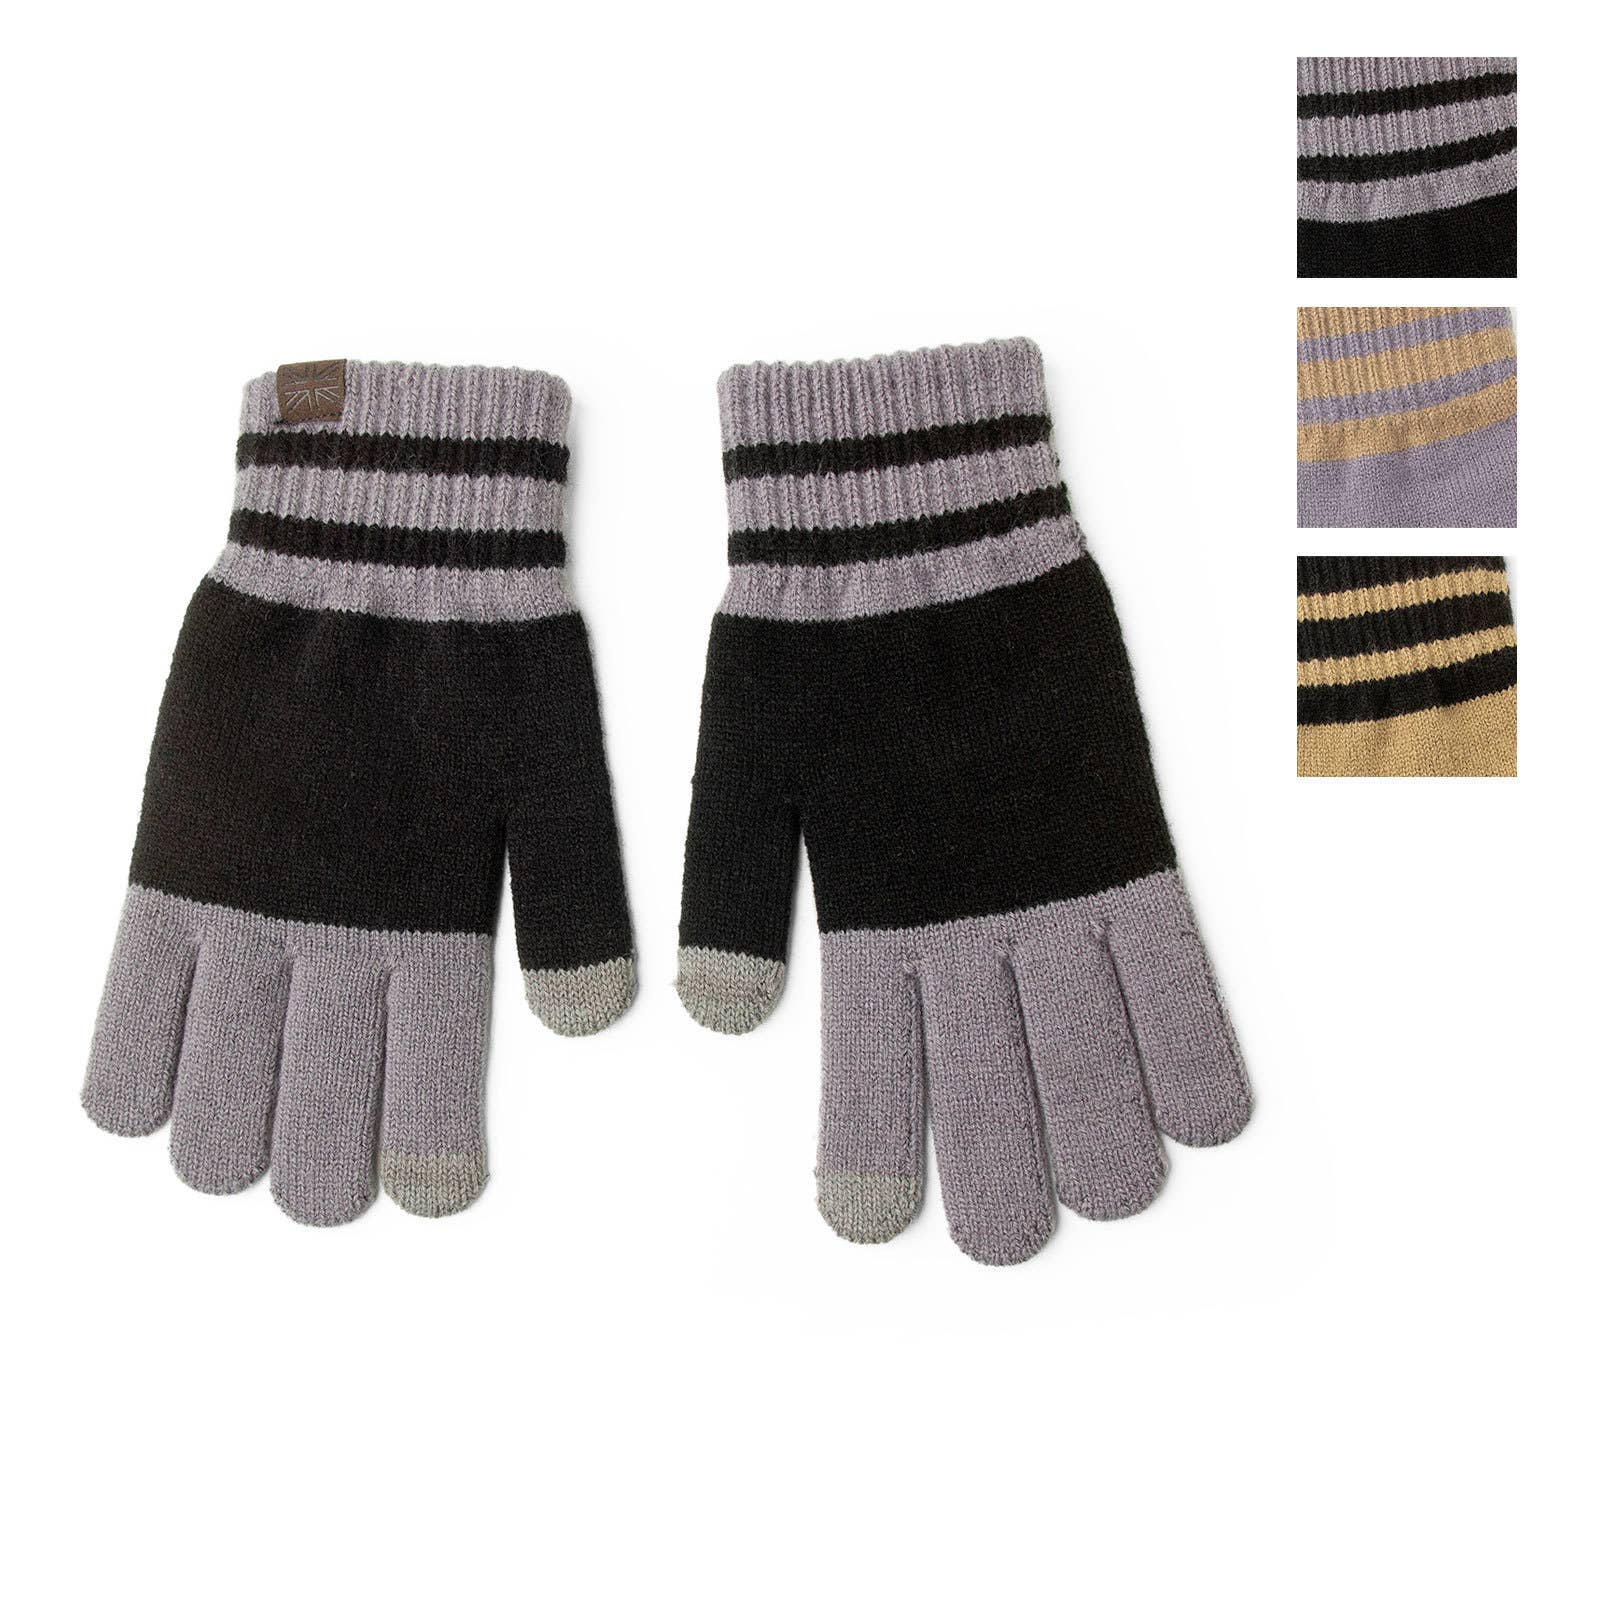 Wholesale Britt's Knits Men's Lodge Gloves Open Stock for your store - Faire